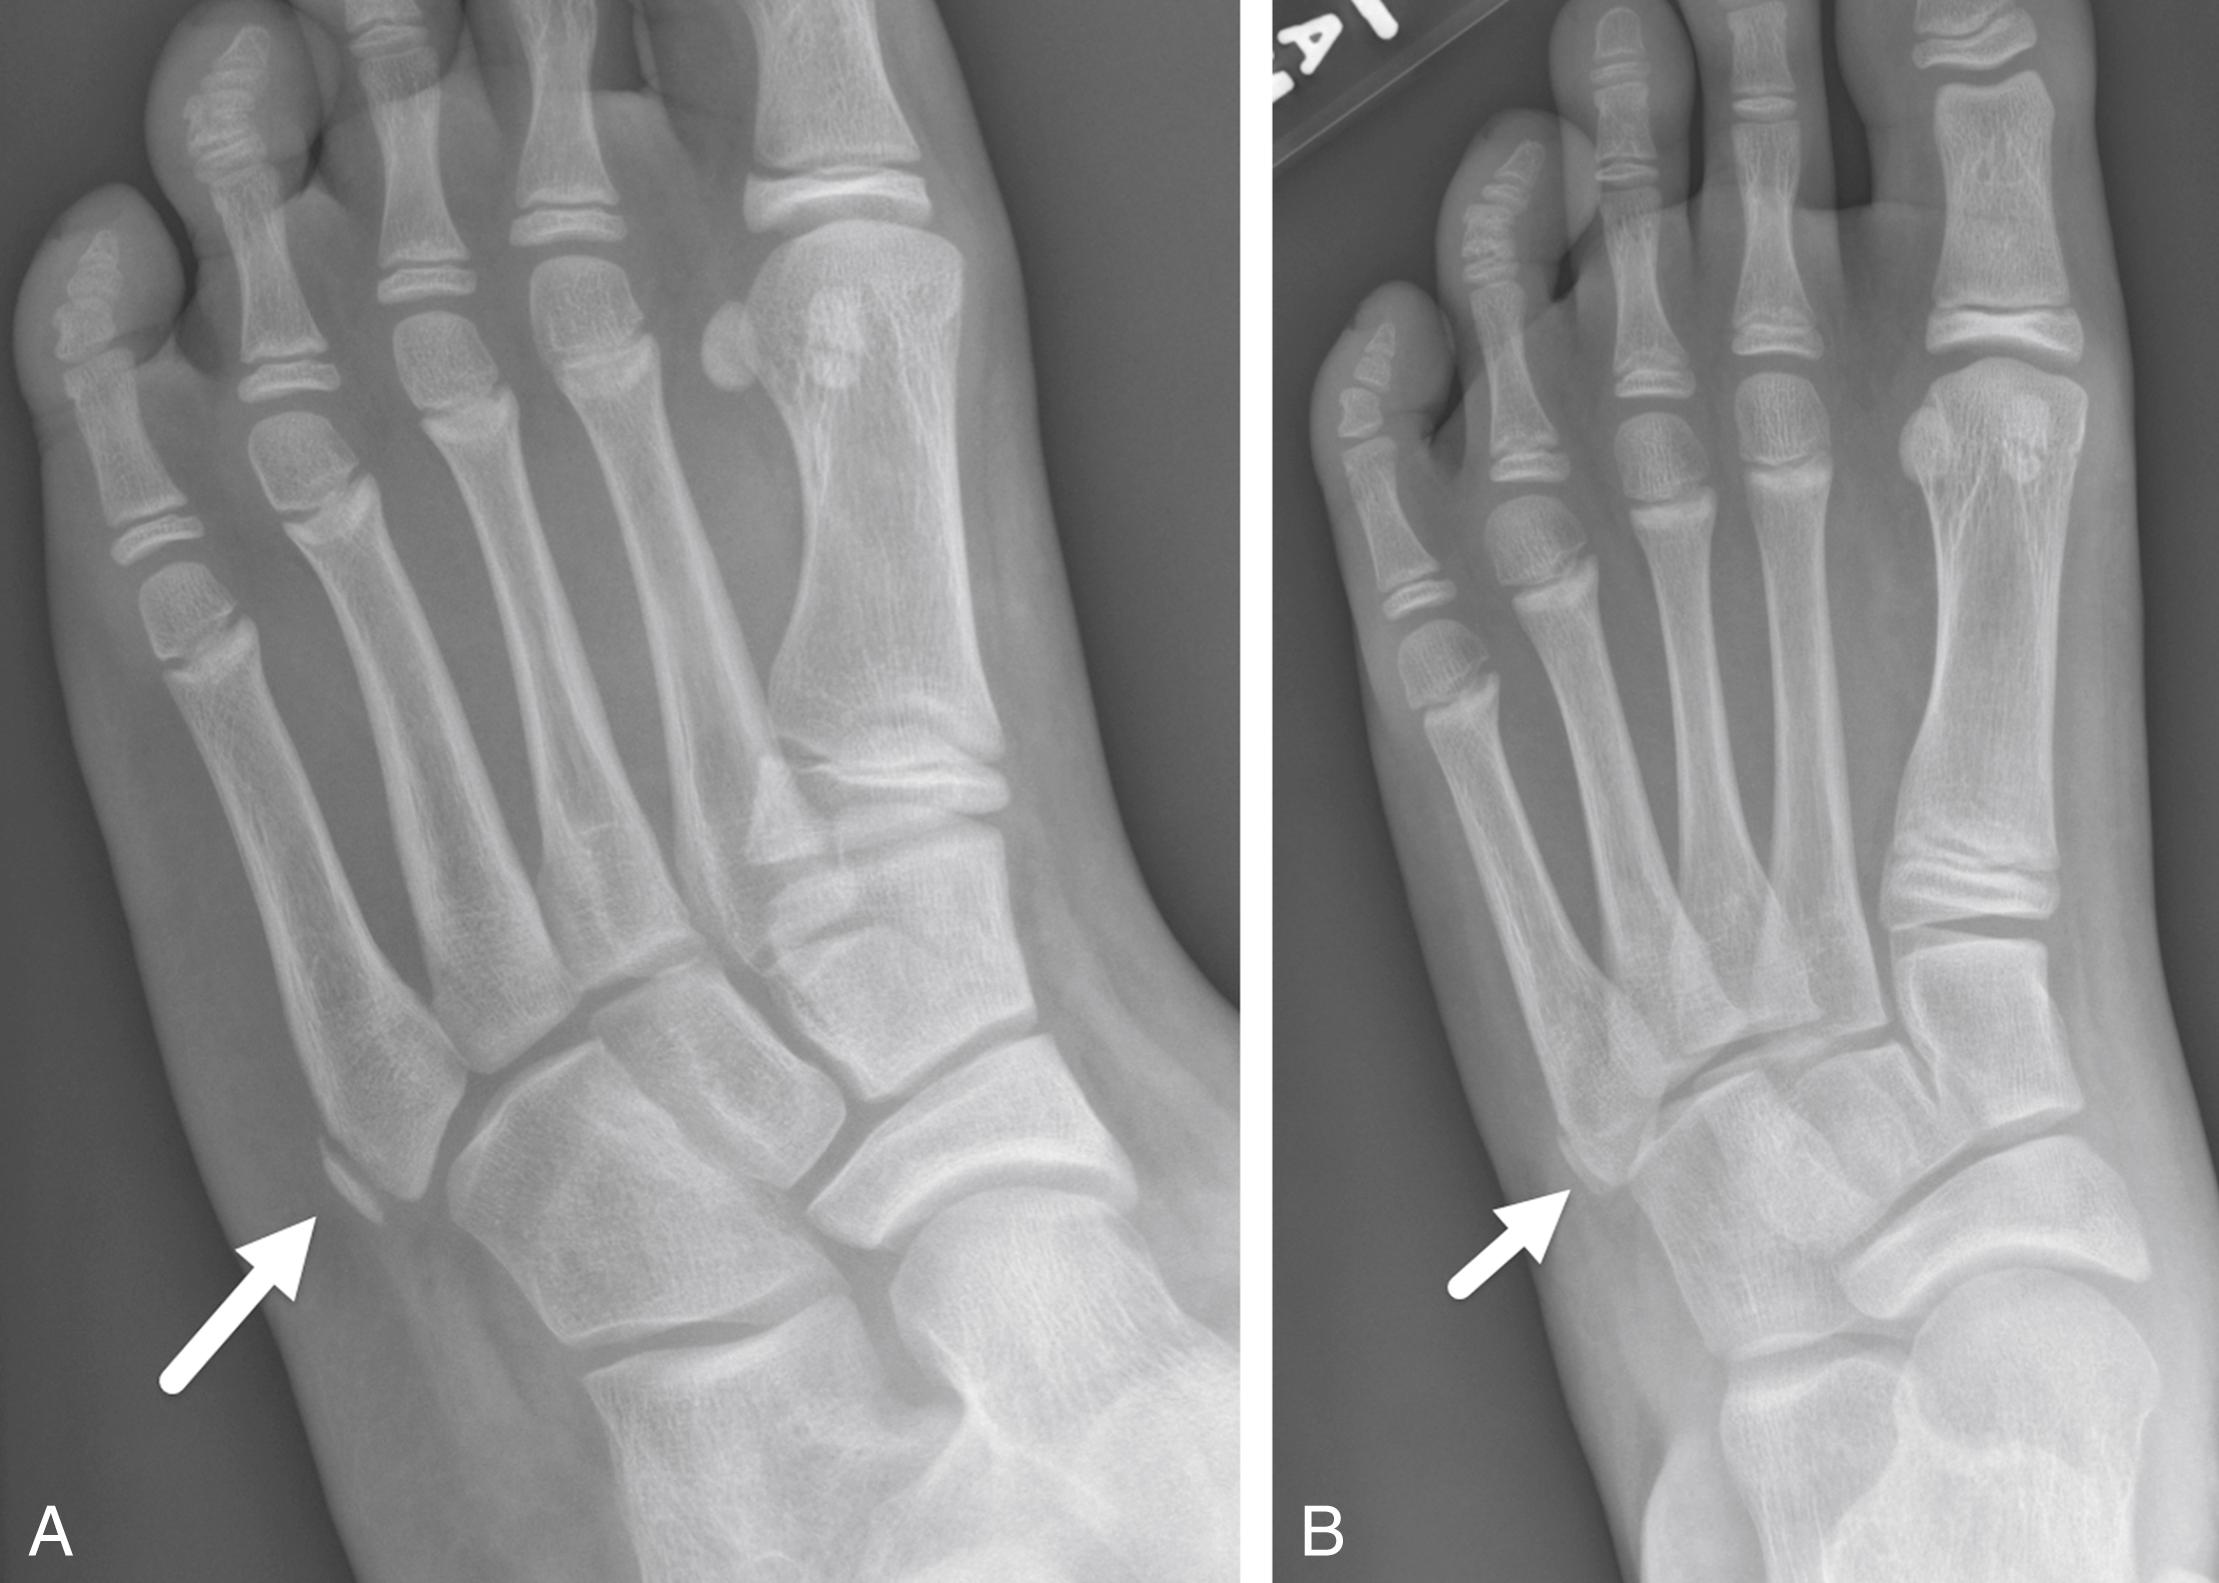 FIGURE 7-46, Normal apophysis of the fifth metatarsal.